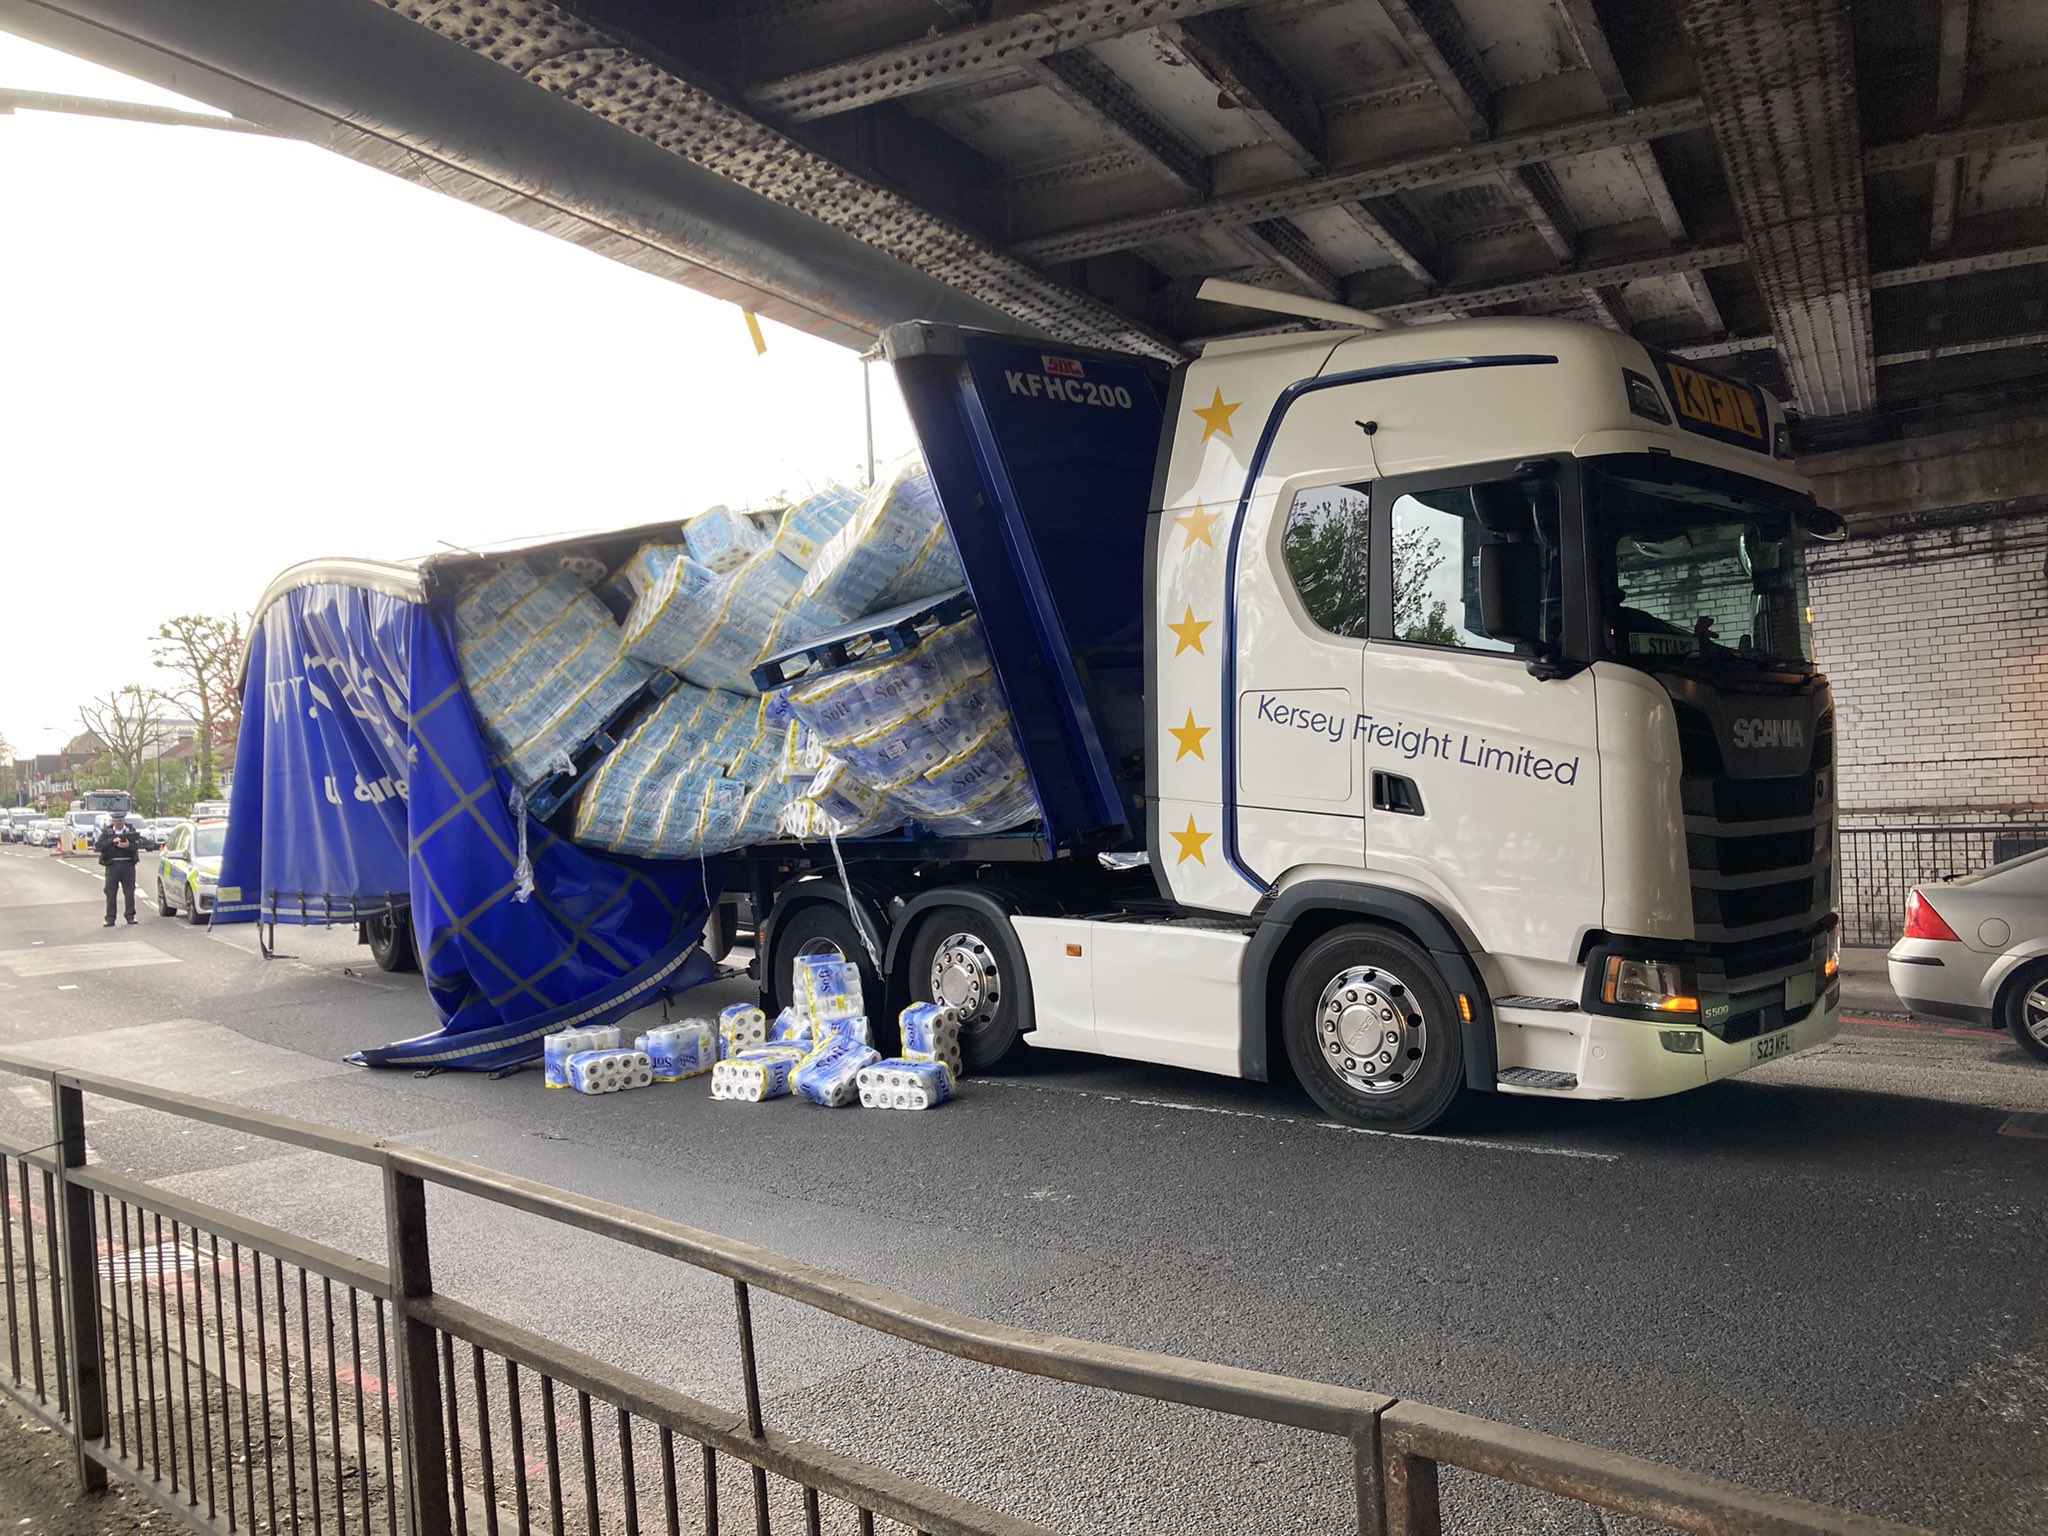 Traffic in south east London was clogged up on Thursday morning after reports that a lorry carrying toilet roll had collided with a bridge.